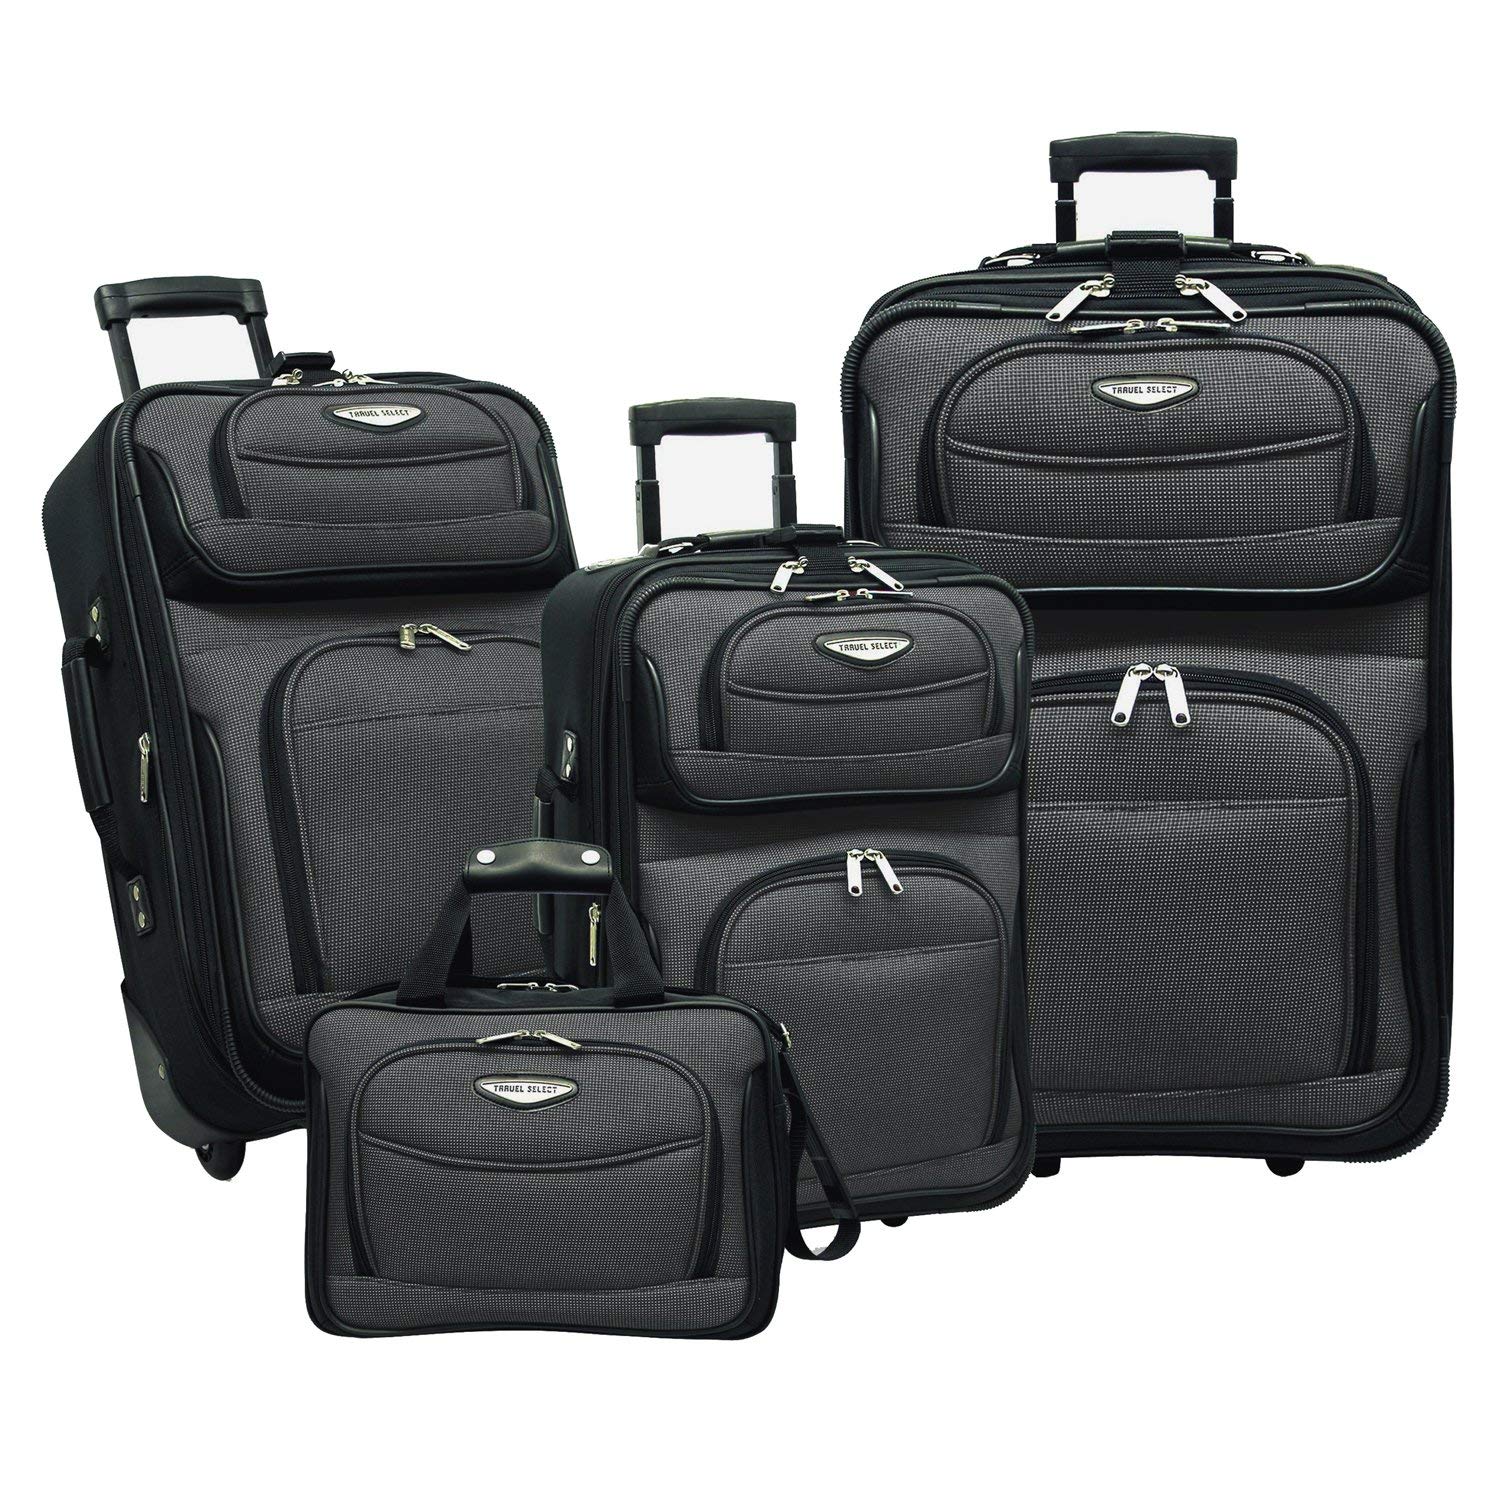 top-10-best-travel-luggage-sets-in-2021-reviews-buyer-s-guide